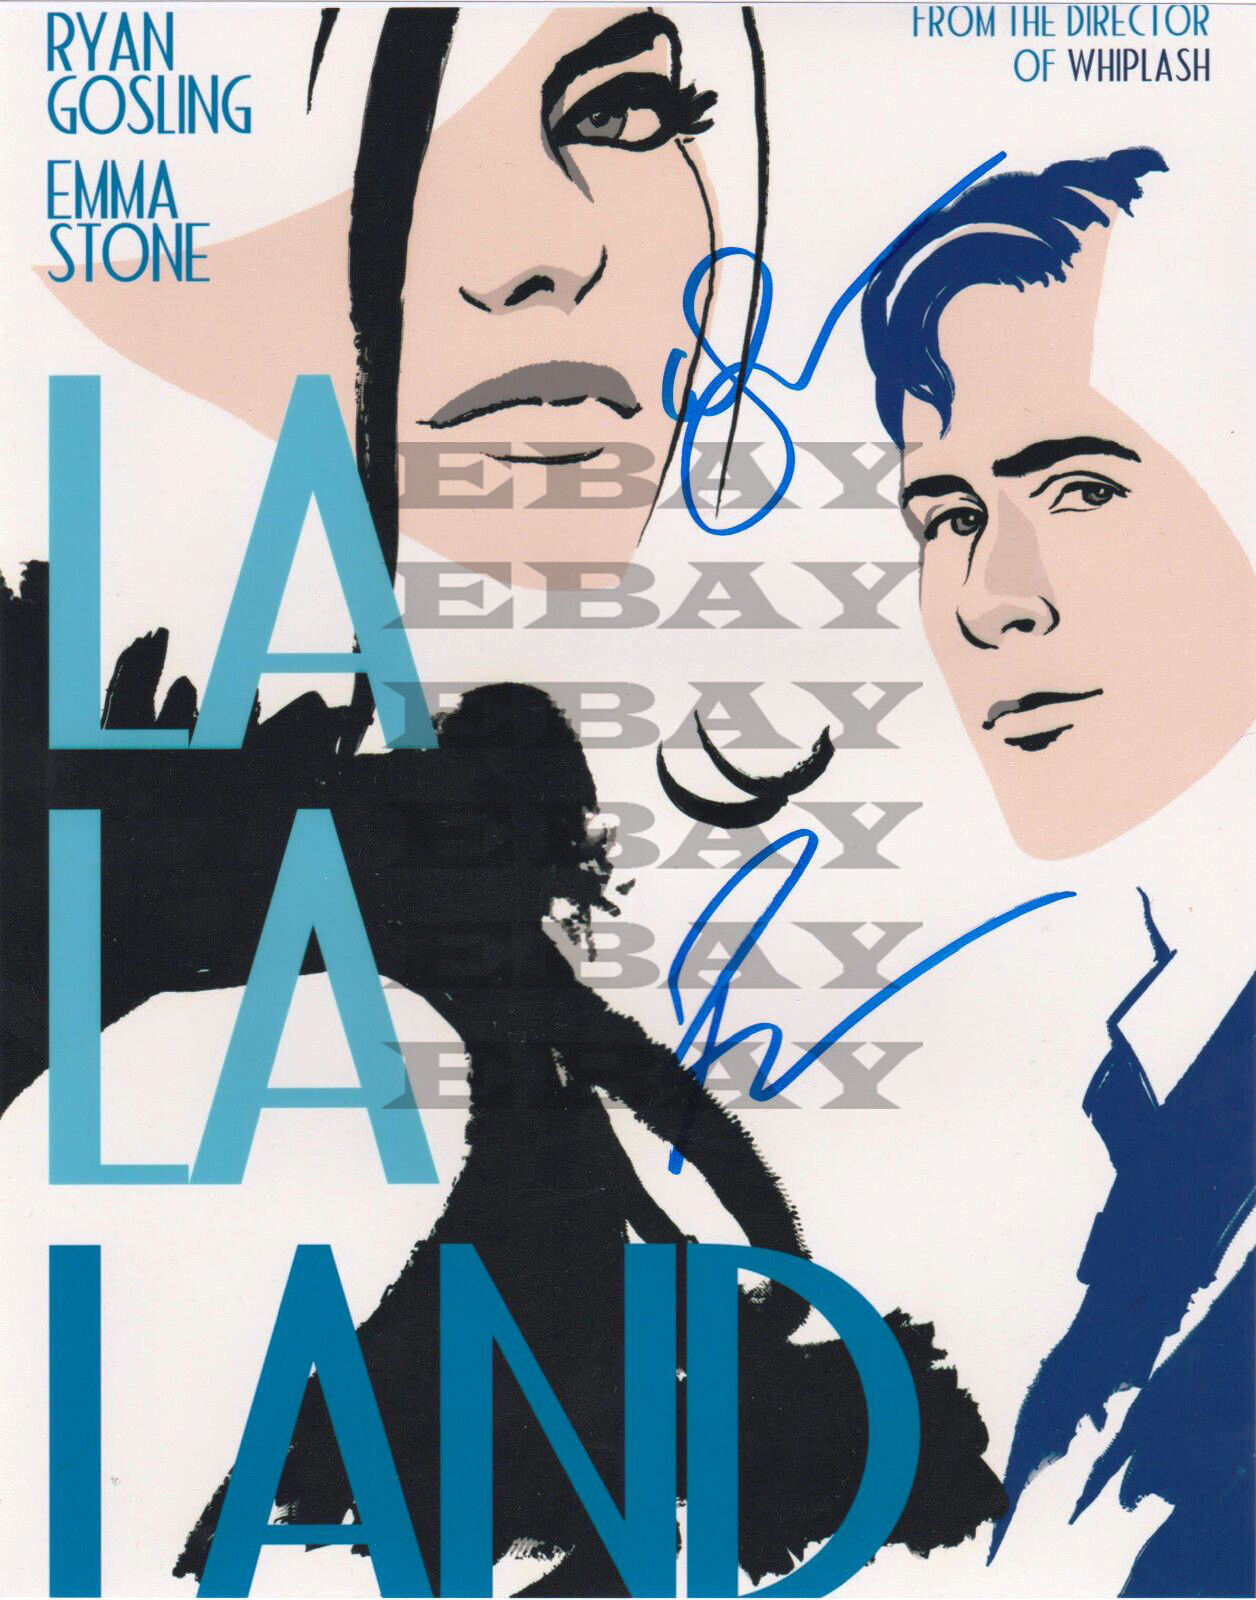 Emma Stone & Ryan Autographed Signed 8x10 Photo Poster painting Reprint